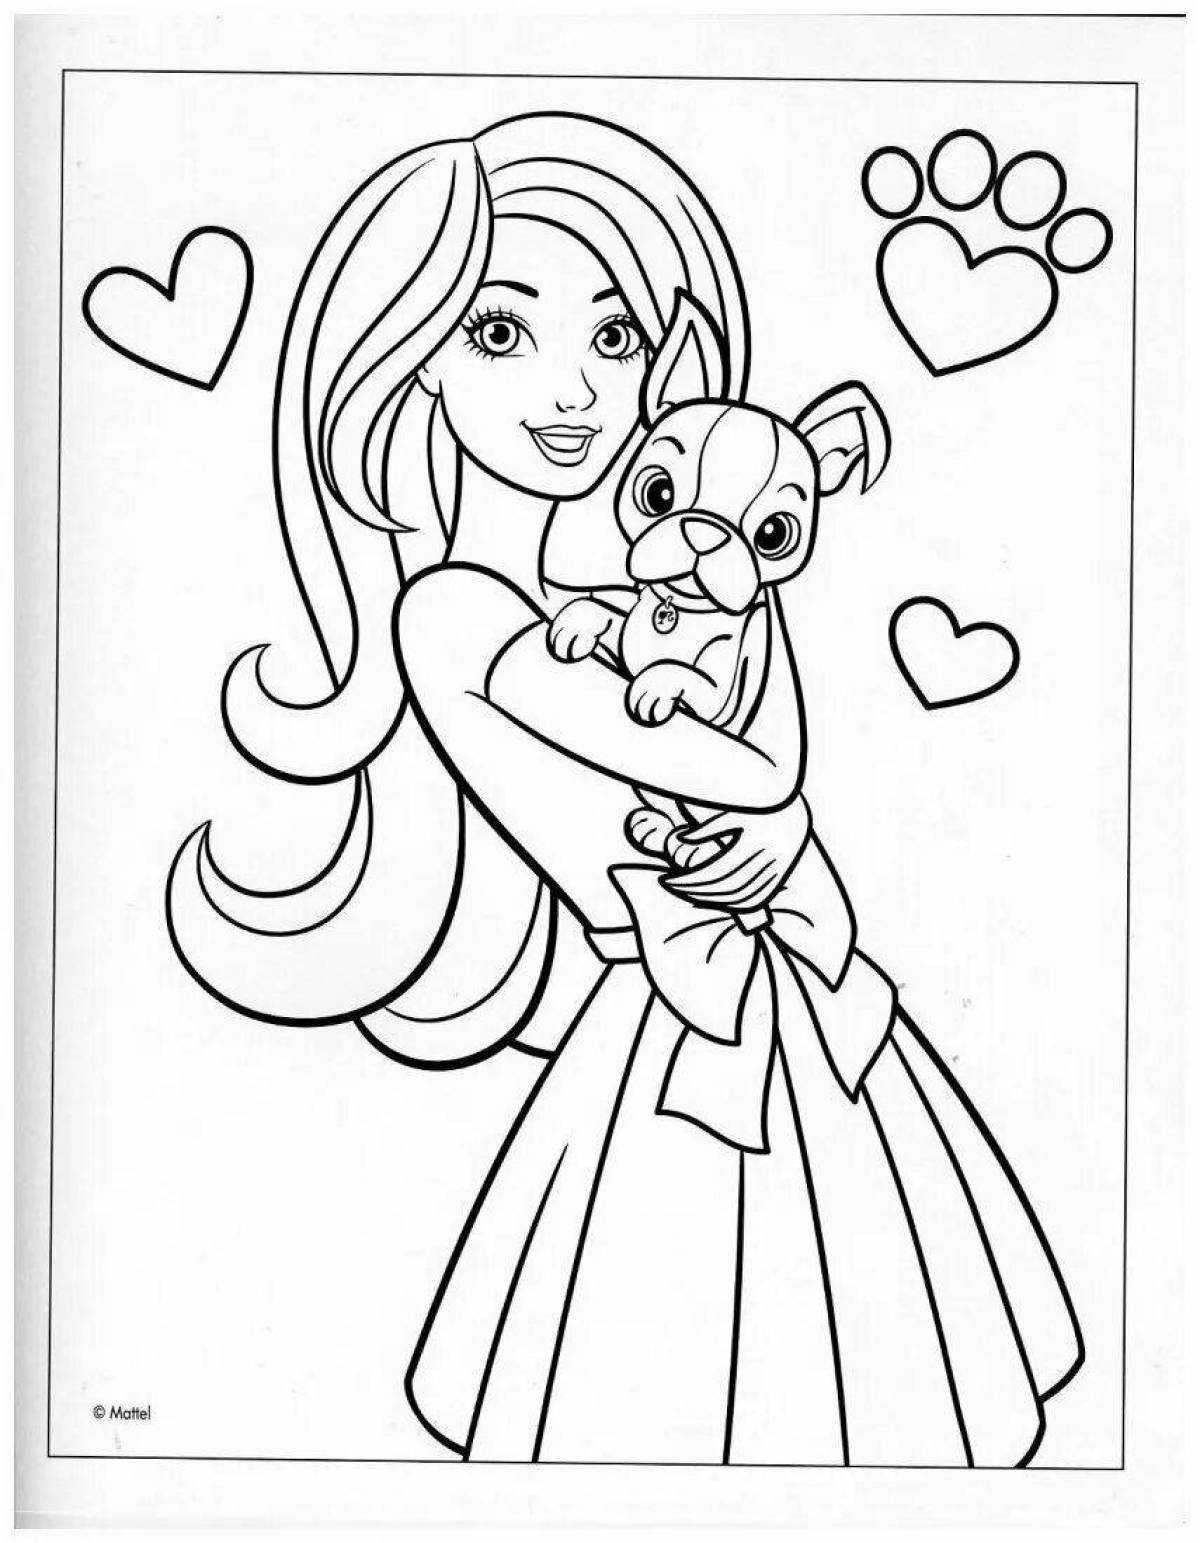 Coloring radiant barbie with a kitten